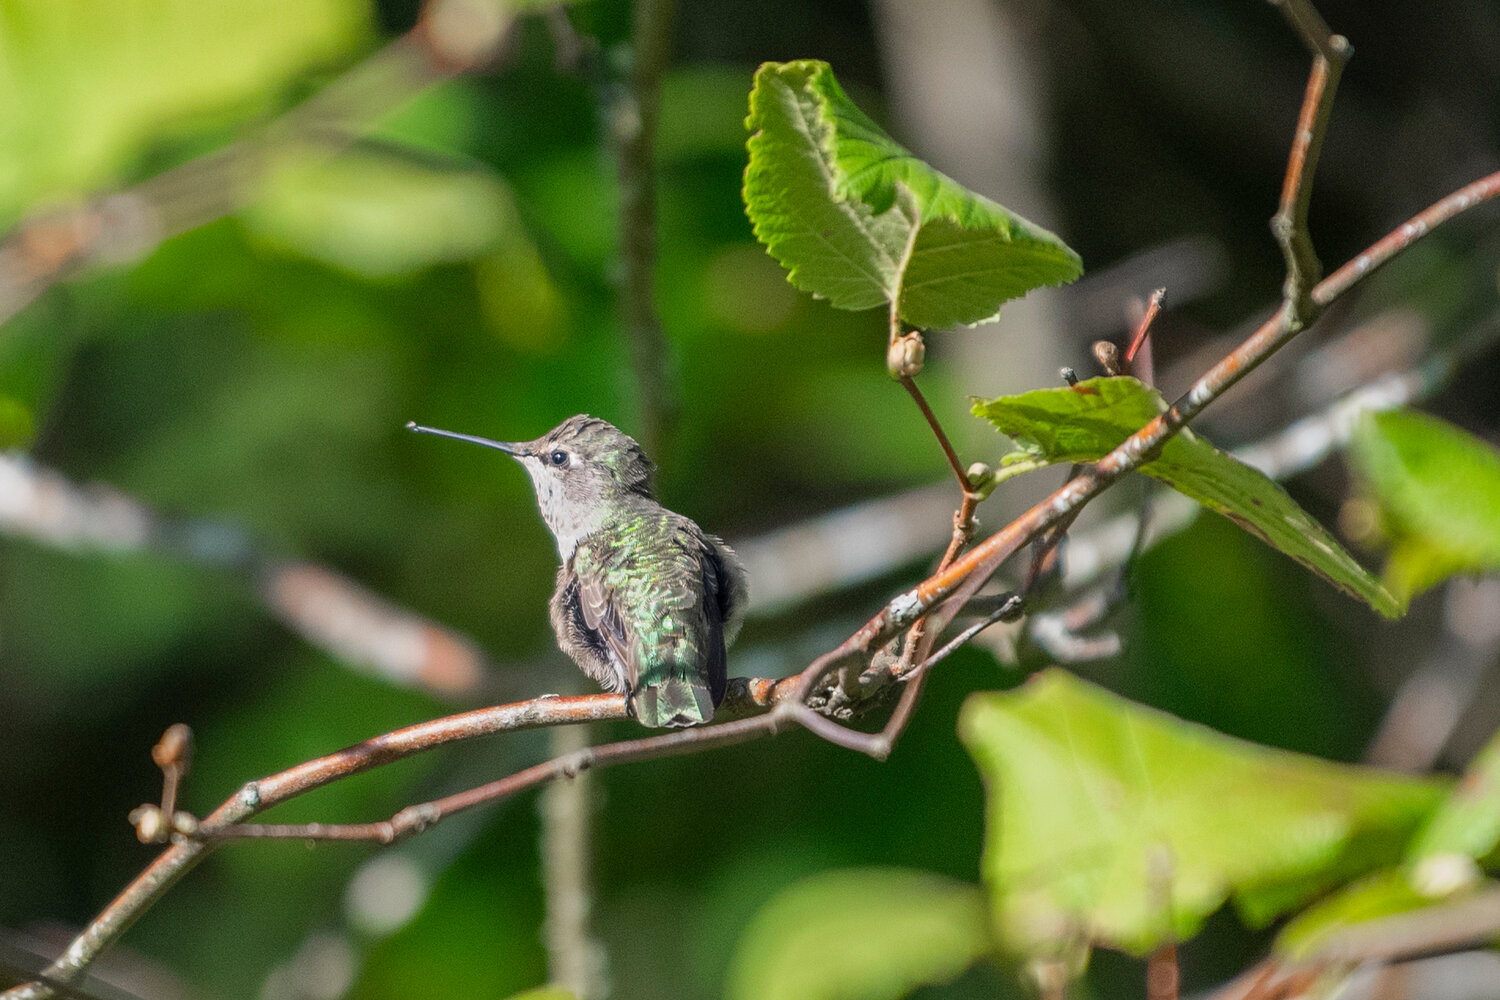 Green feathers on the Anna’s hummingbird’s back flash in the morning sun on Thursday, Sept. 14.